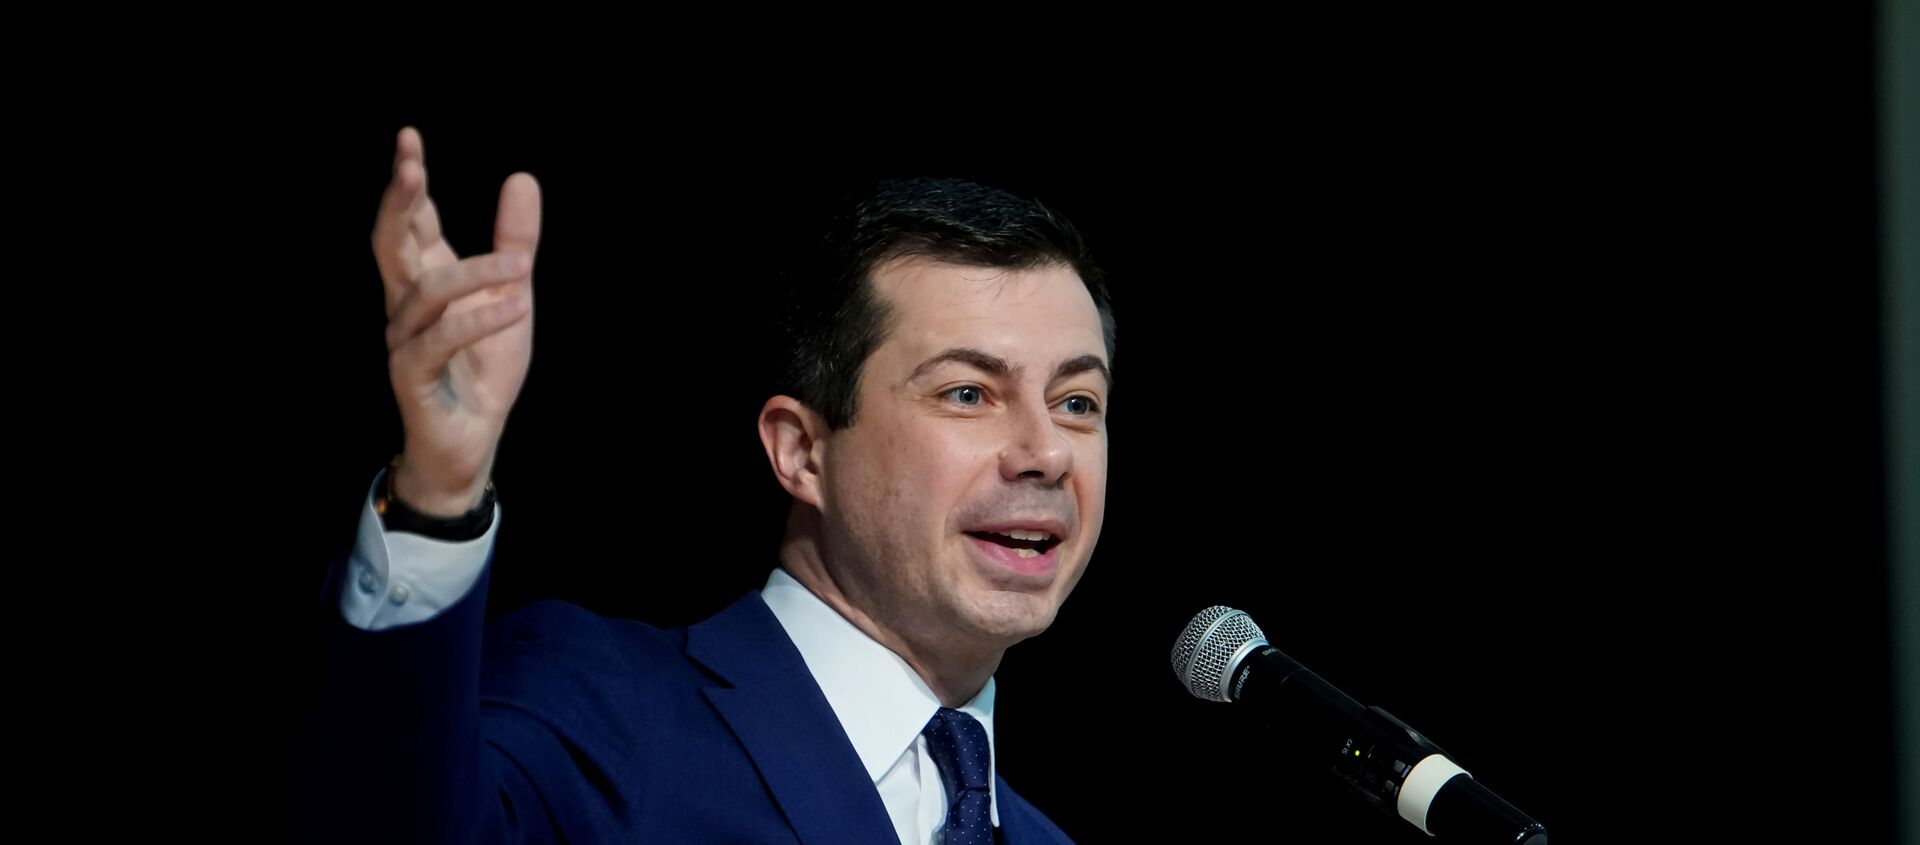 Democratic 2020 U.S. presidential candidate former South Bend, Indiana Mayor Pete Buttigieg attends the Ministers' Breakfast hosted by National Action Network in North Charleston, South Carolina, U.S., February 26, 2020 - Sputnik International, 1920, 26.02.2020